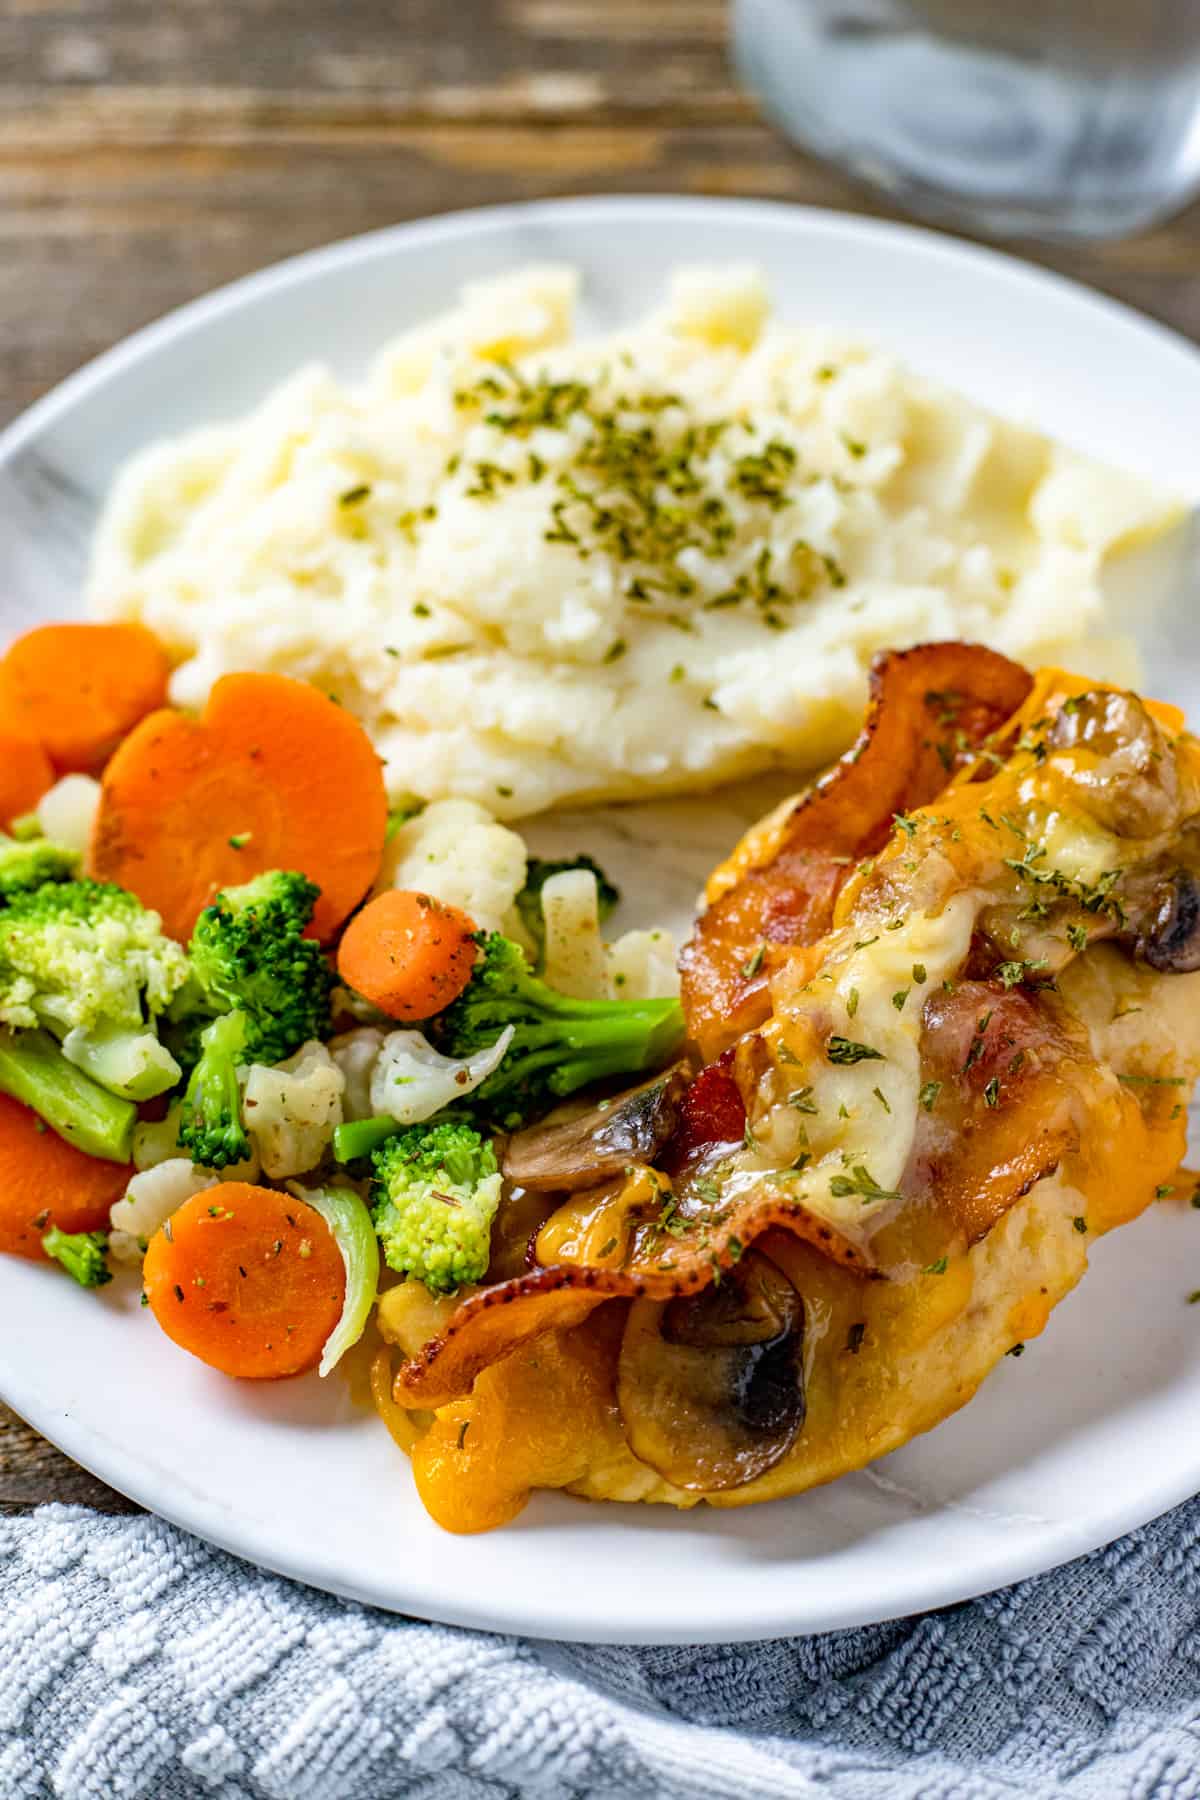 A plate of chicken, vegetables and potato.